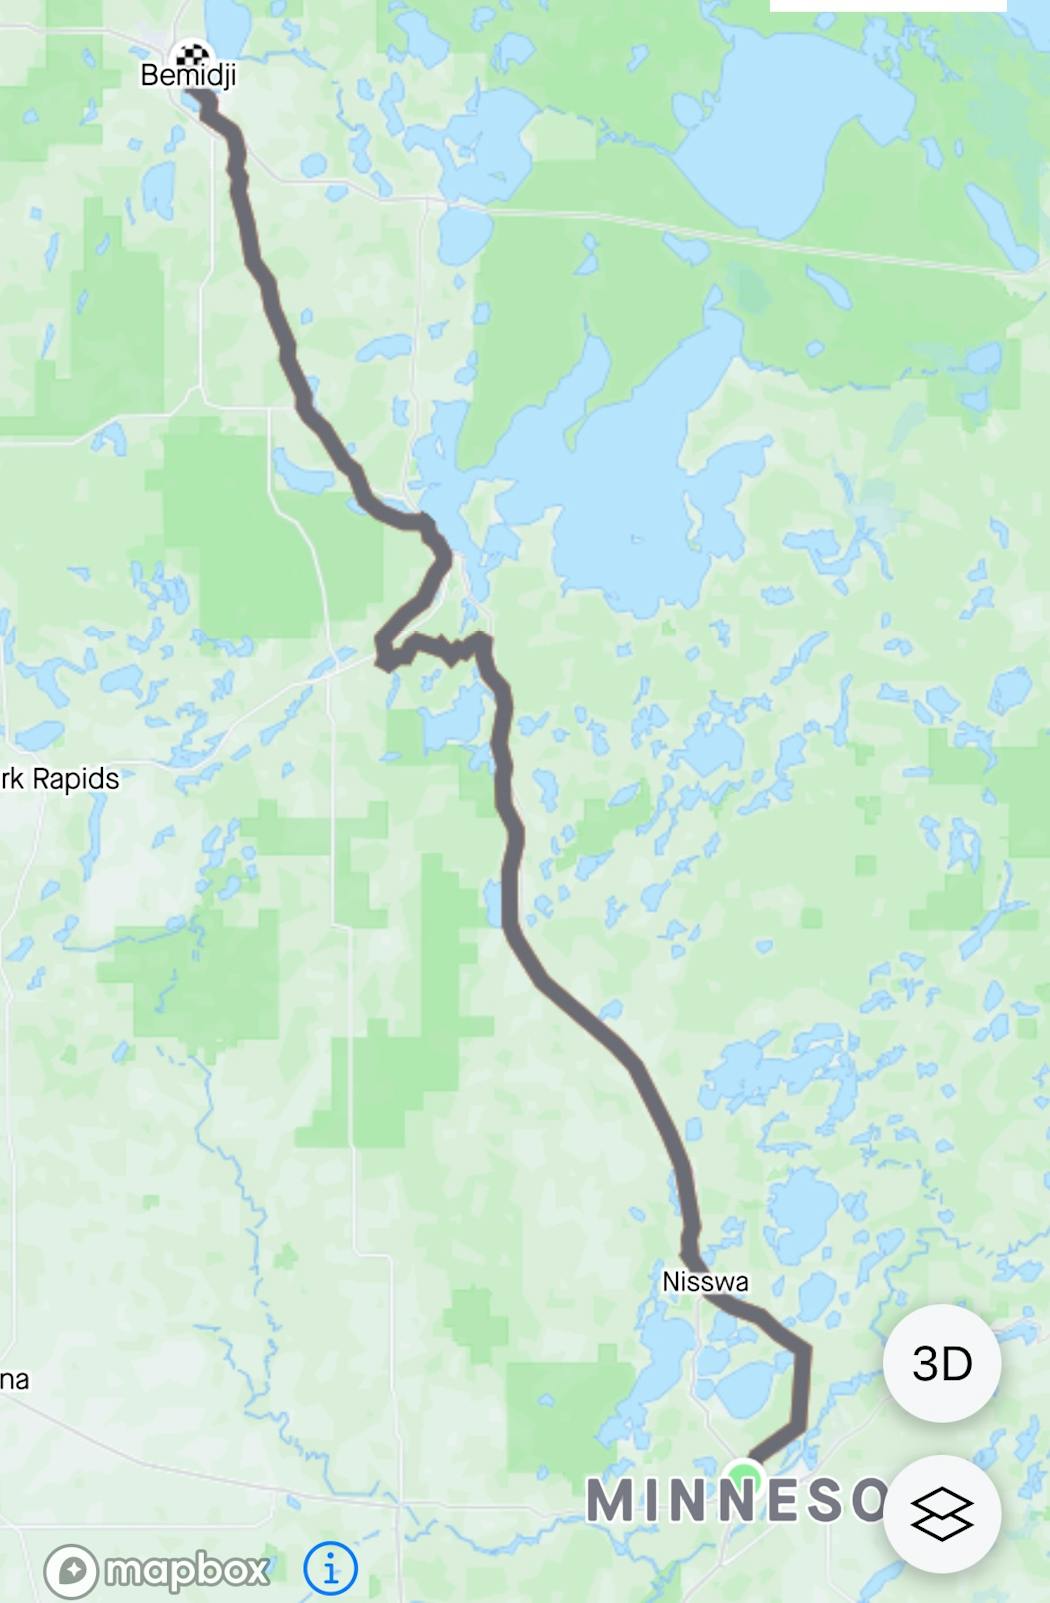 The path of the long, long scooter trip.